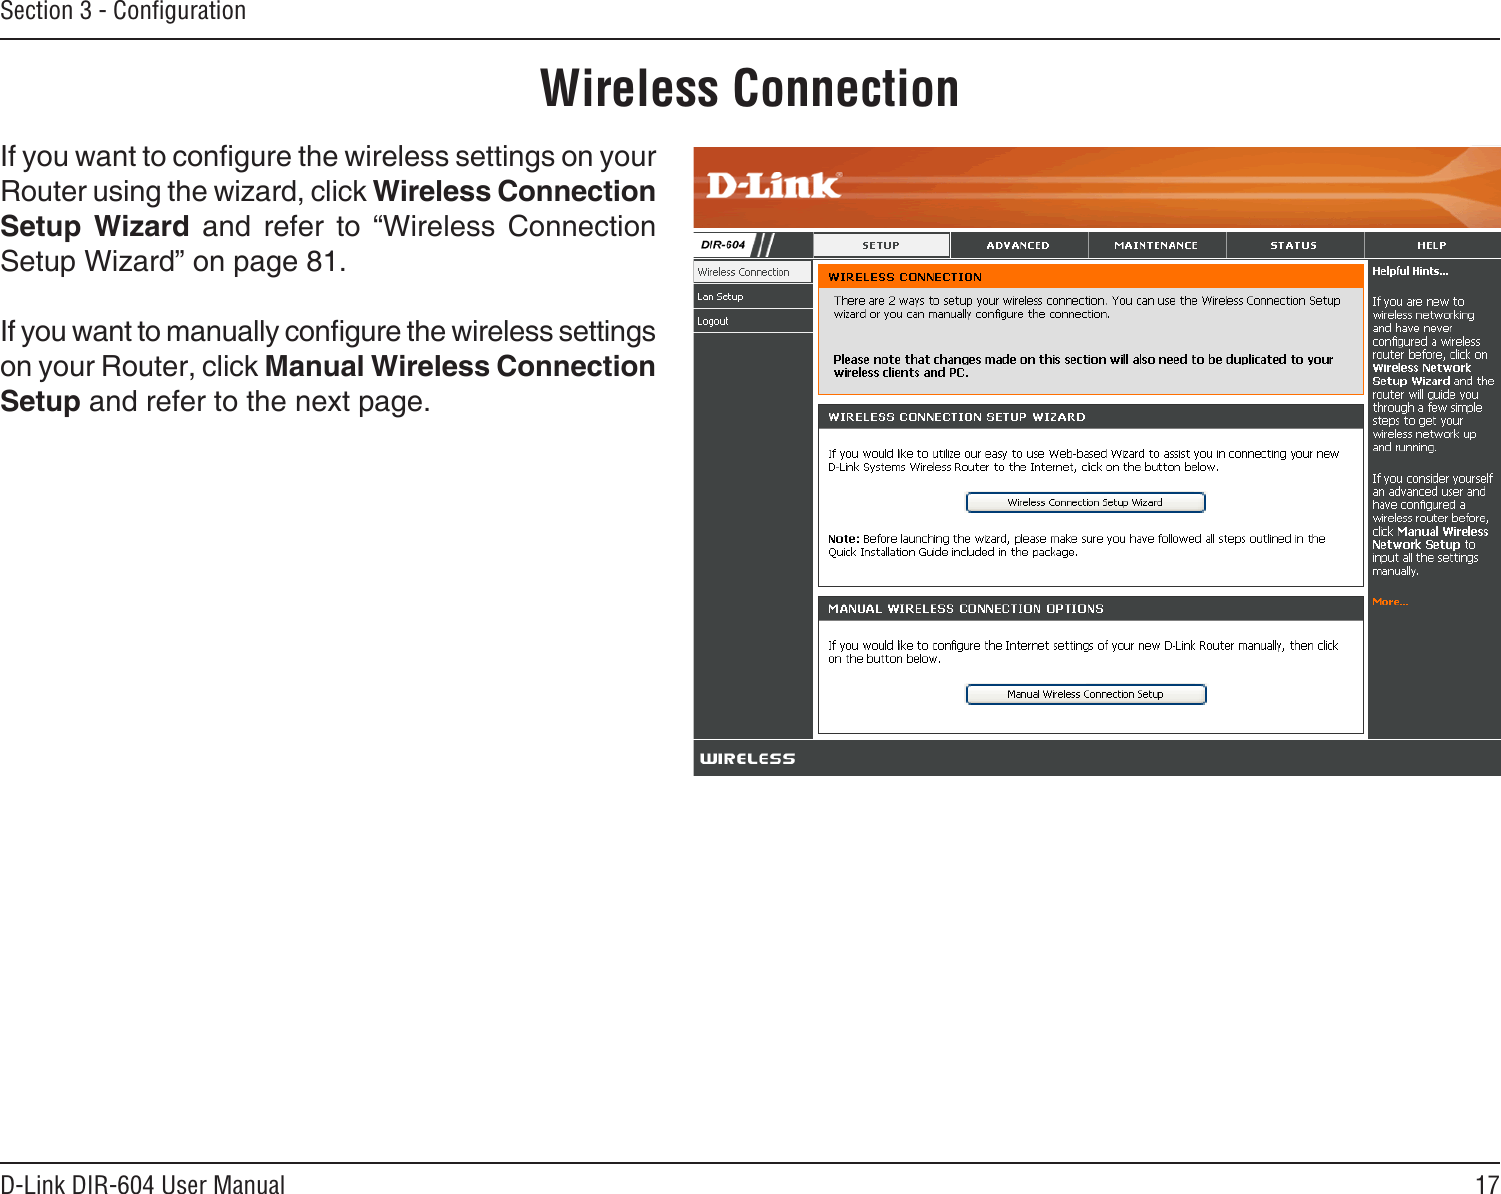 17D-Link DIR-604 User ManualSection 3 - ConﬁgurationWireless ConnectionIf you want to congure the wireless settings on your Router using the wizard, click Wireless Connection Setup  Wizard  and  refer  to  “Wireless  Connection Setup Wizard” on page 81.If you want to manually congure the wireless settings on your Router, click Manual Wireless Connection Setup and refer to the next page.